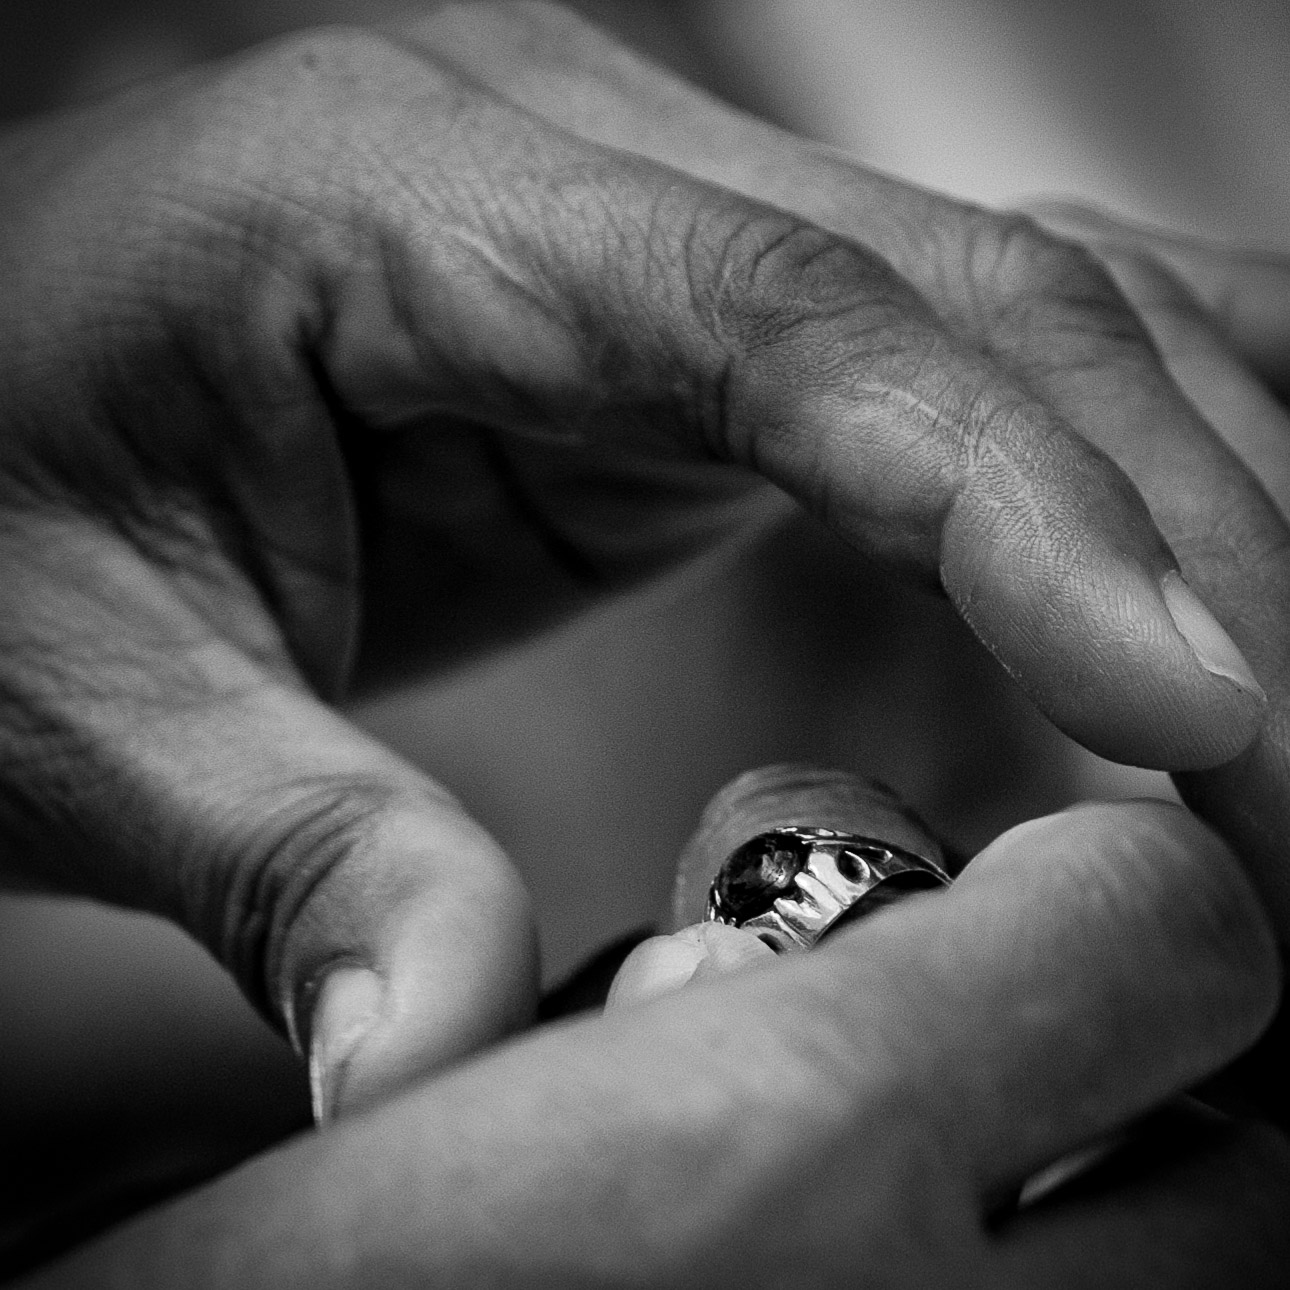 Ngaben cremation in Bali, placing a ring on the deceased man's finger during the bathing ritual.